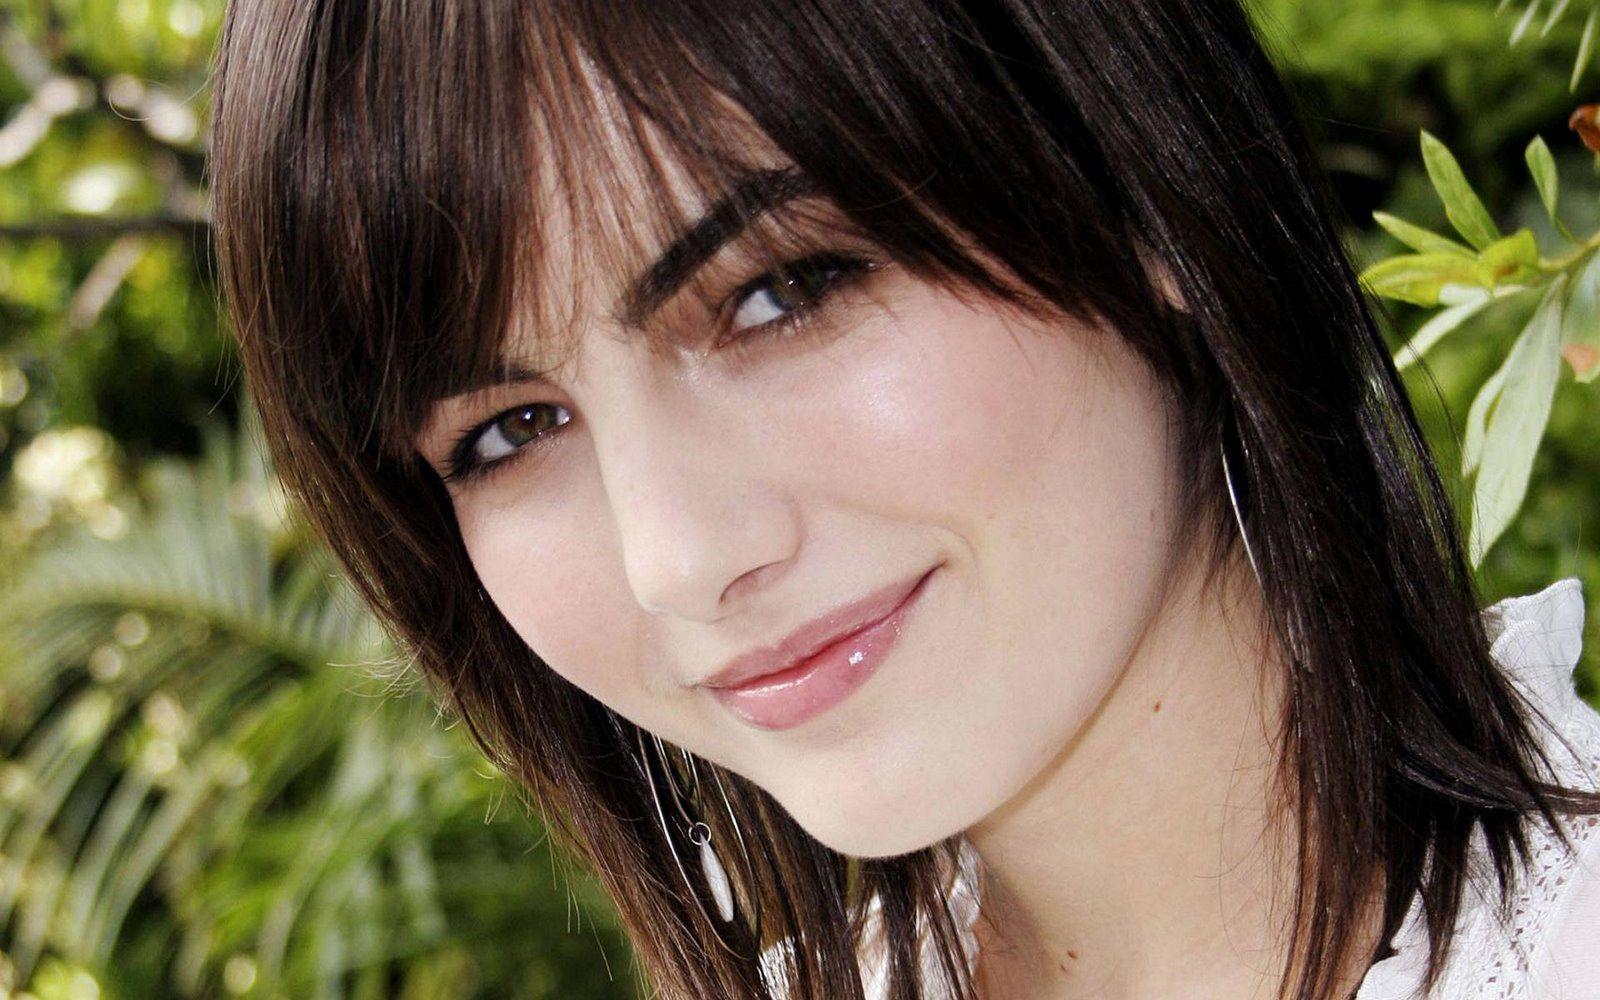 HQ Widescreen Celebrity Wallpaper Without Watermarks: Camilla Belle 1